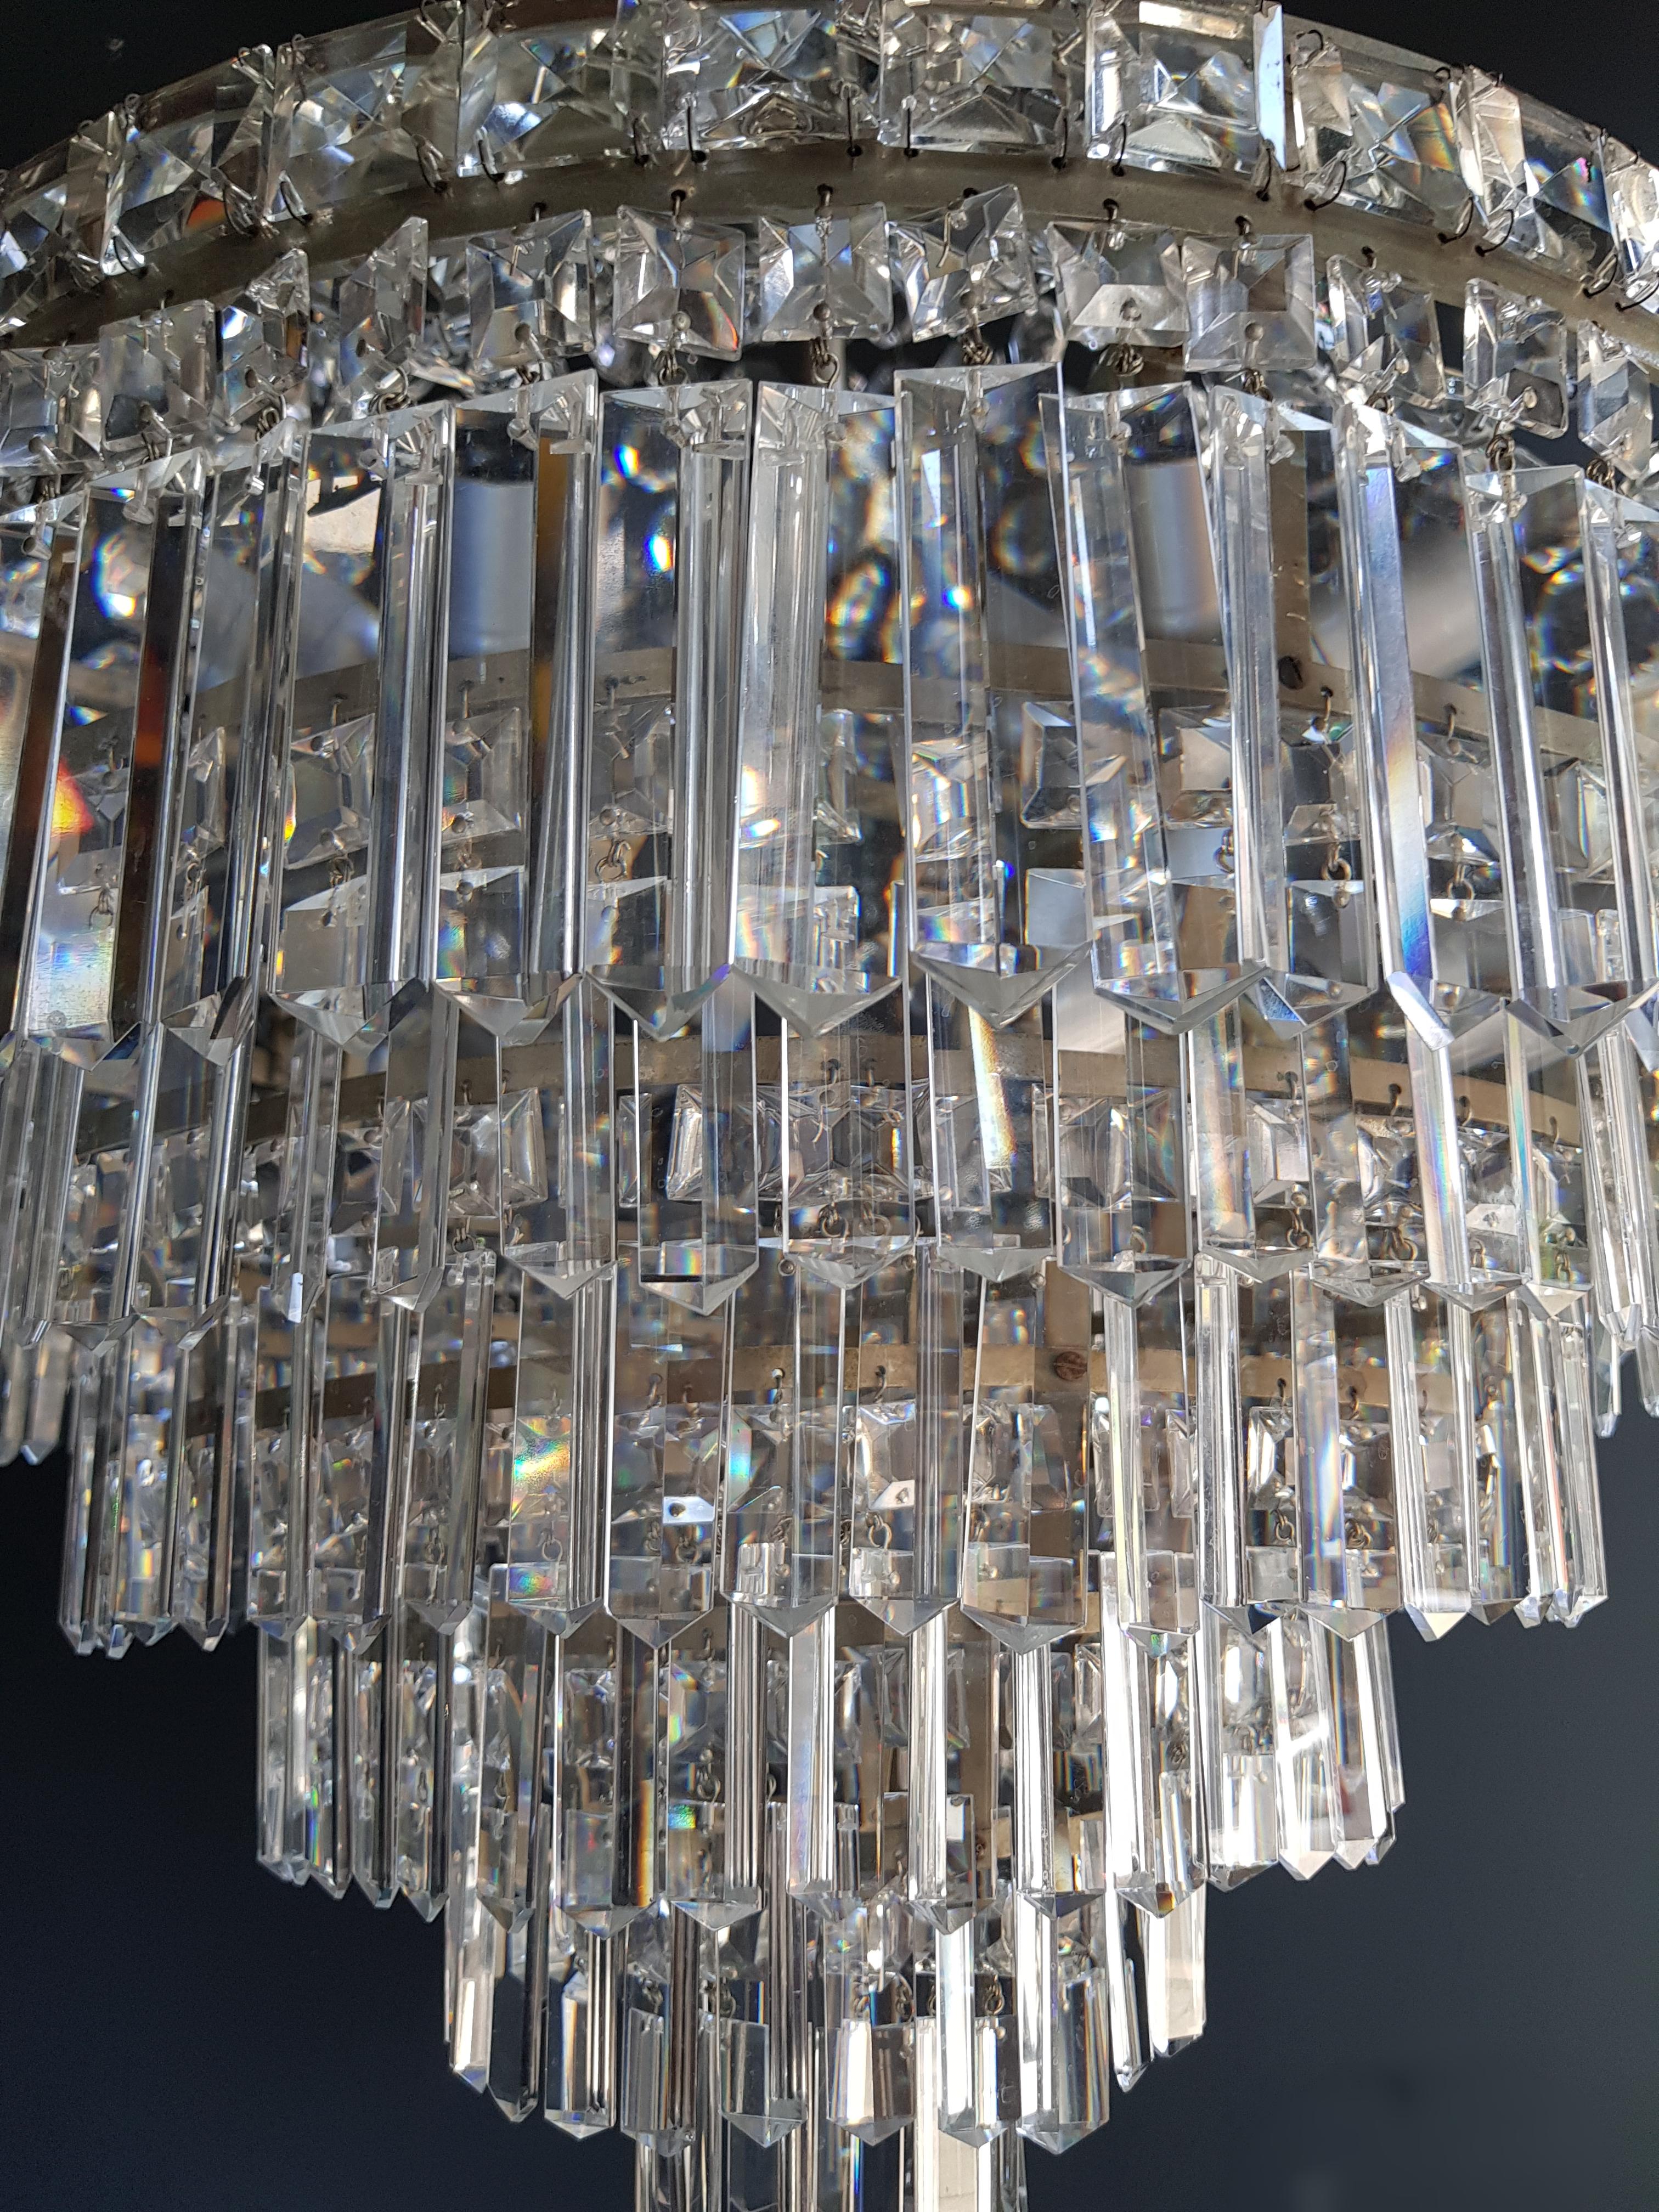 Mid-20th Century Fine Empire Waterfall Chandelier Crystal Sac a Pearl Lamp Lustre Silver Art Deco